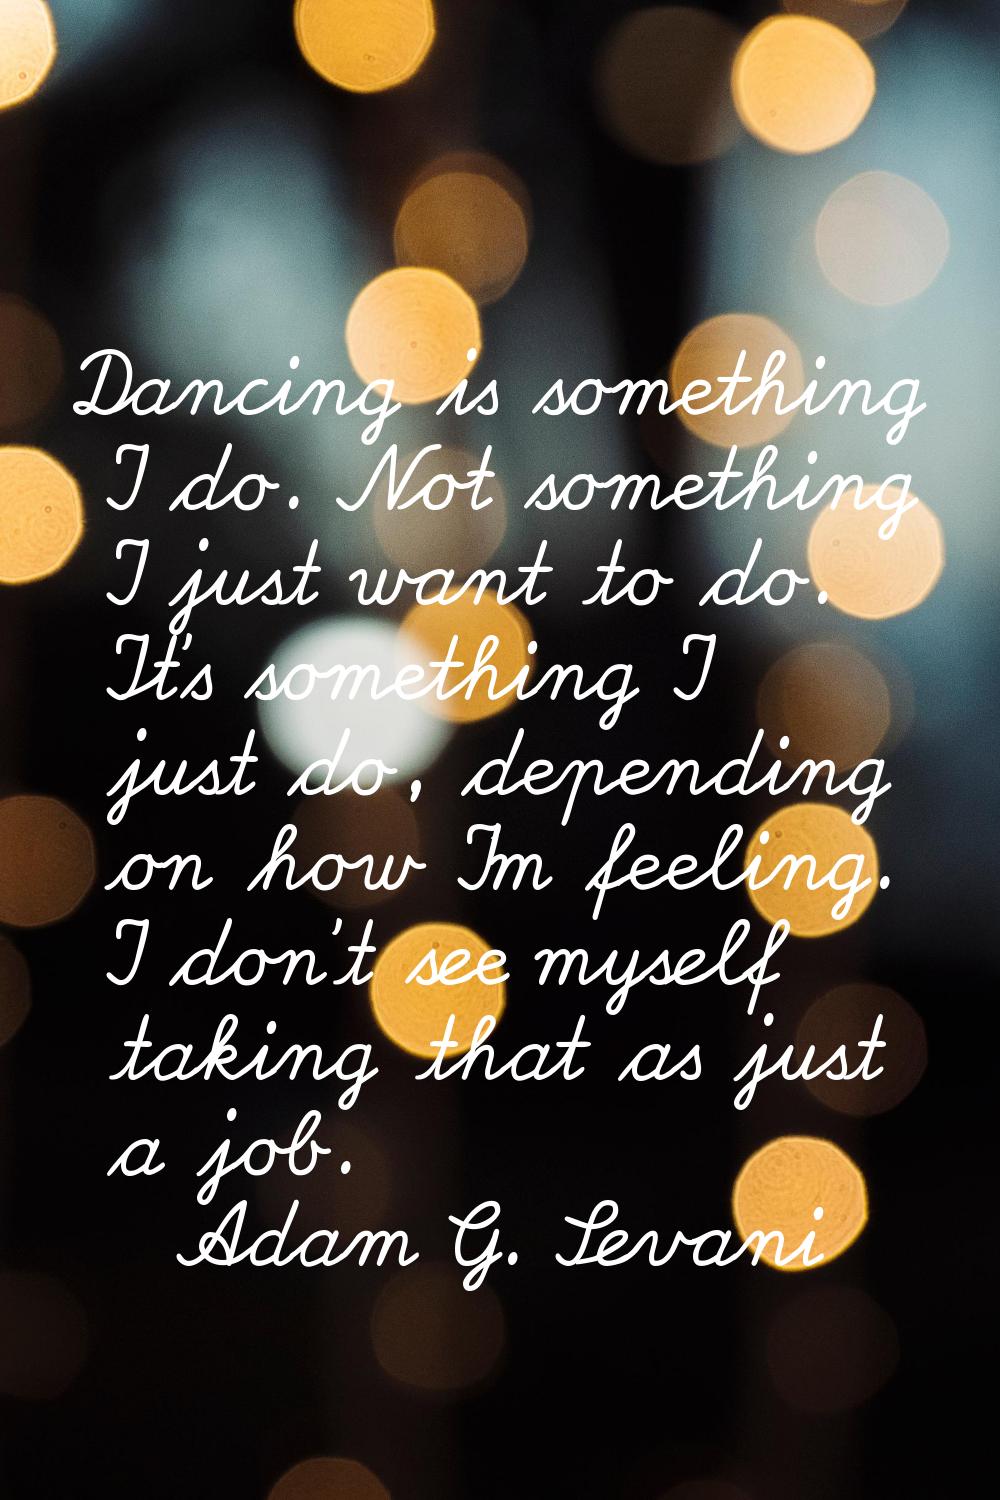 Dancing is something I do. Not something I just want to do. It's something I just do, depending on 